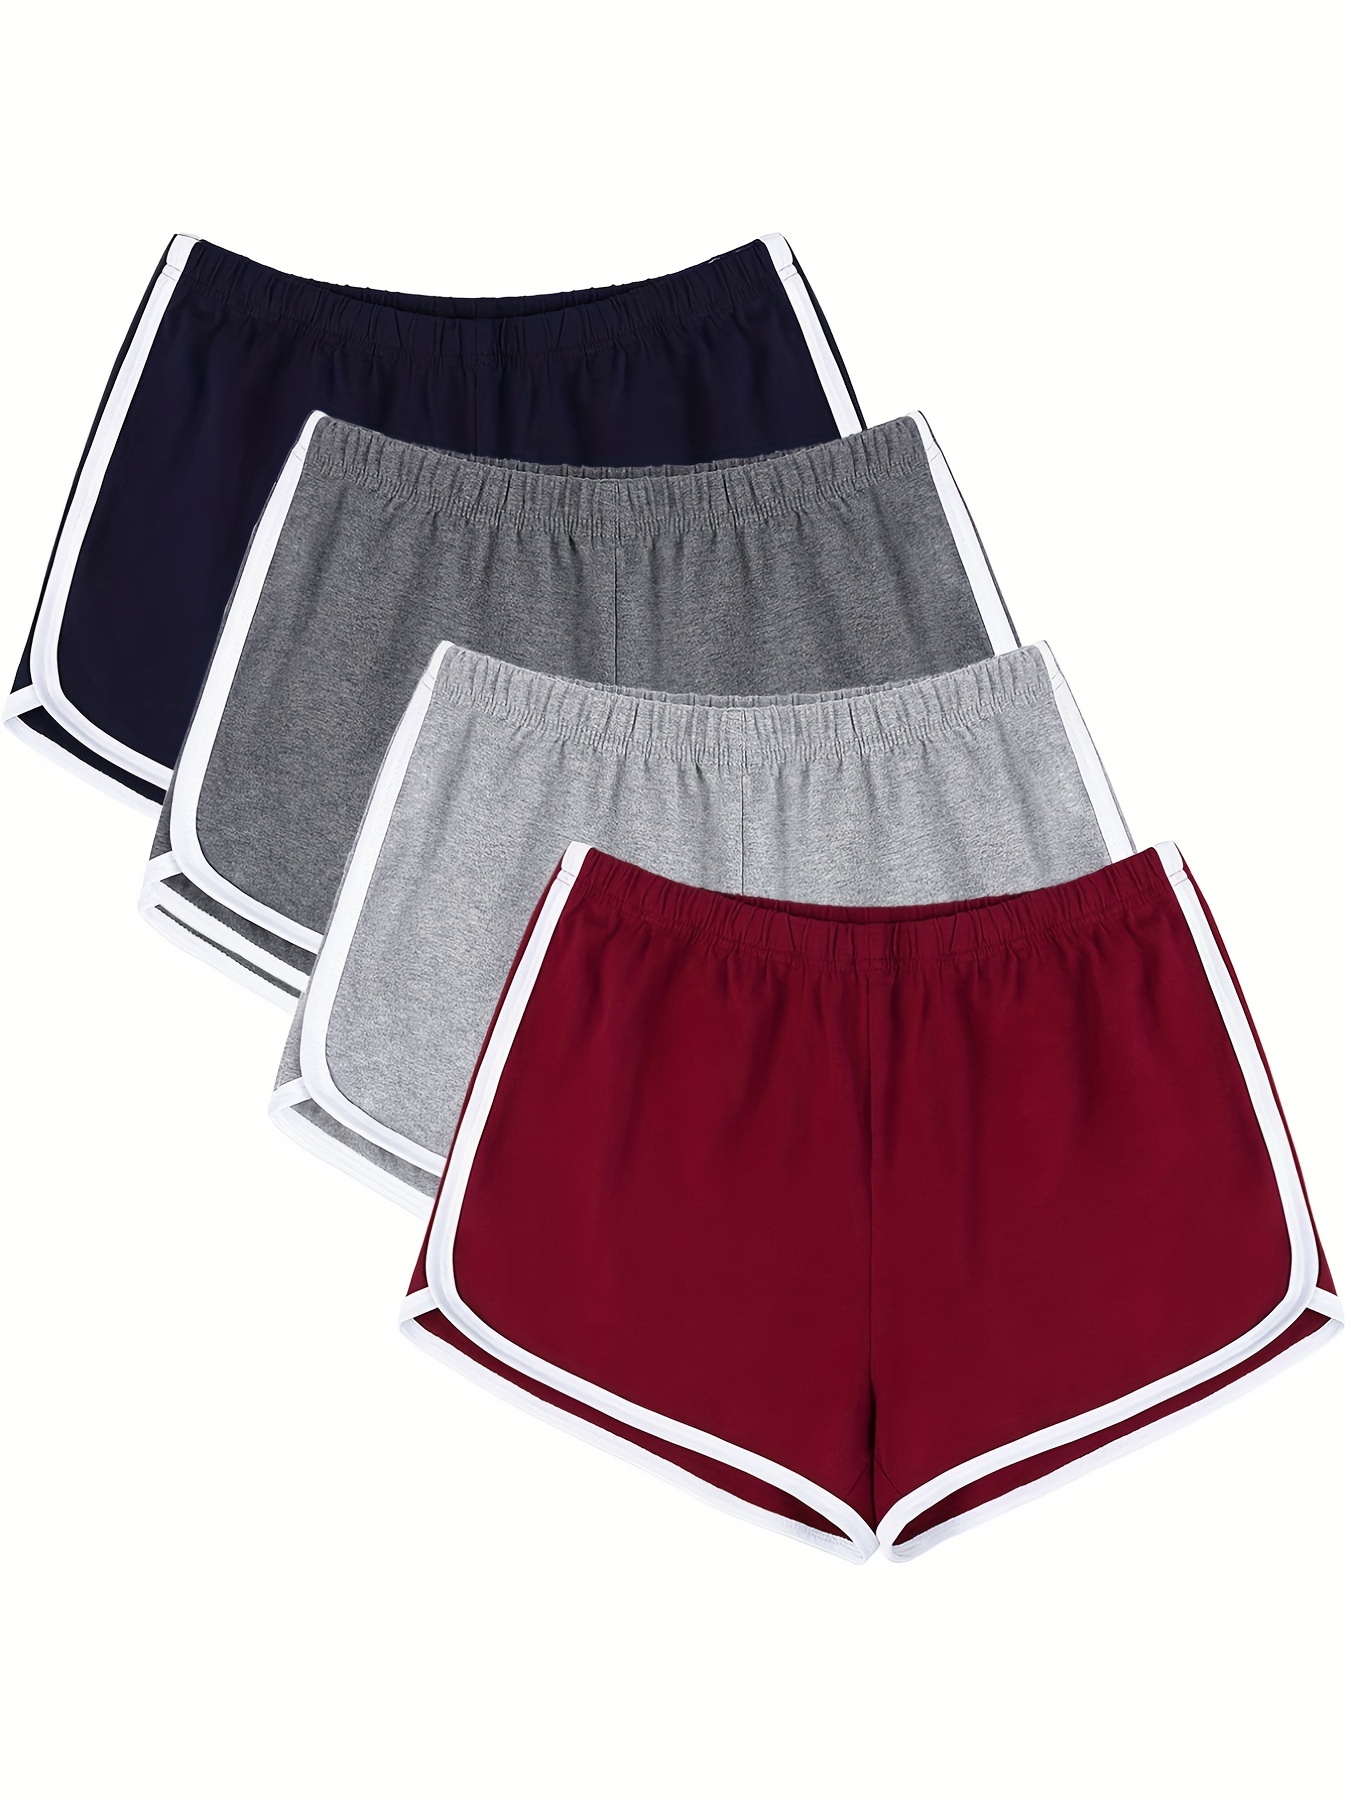 Best Deal for Womens Yoga Shorts Sexy Womens Shorts Cotton High Elastic